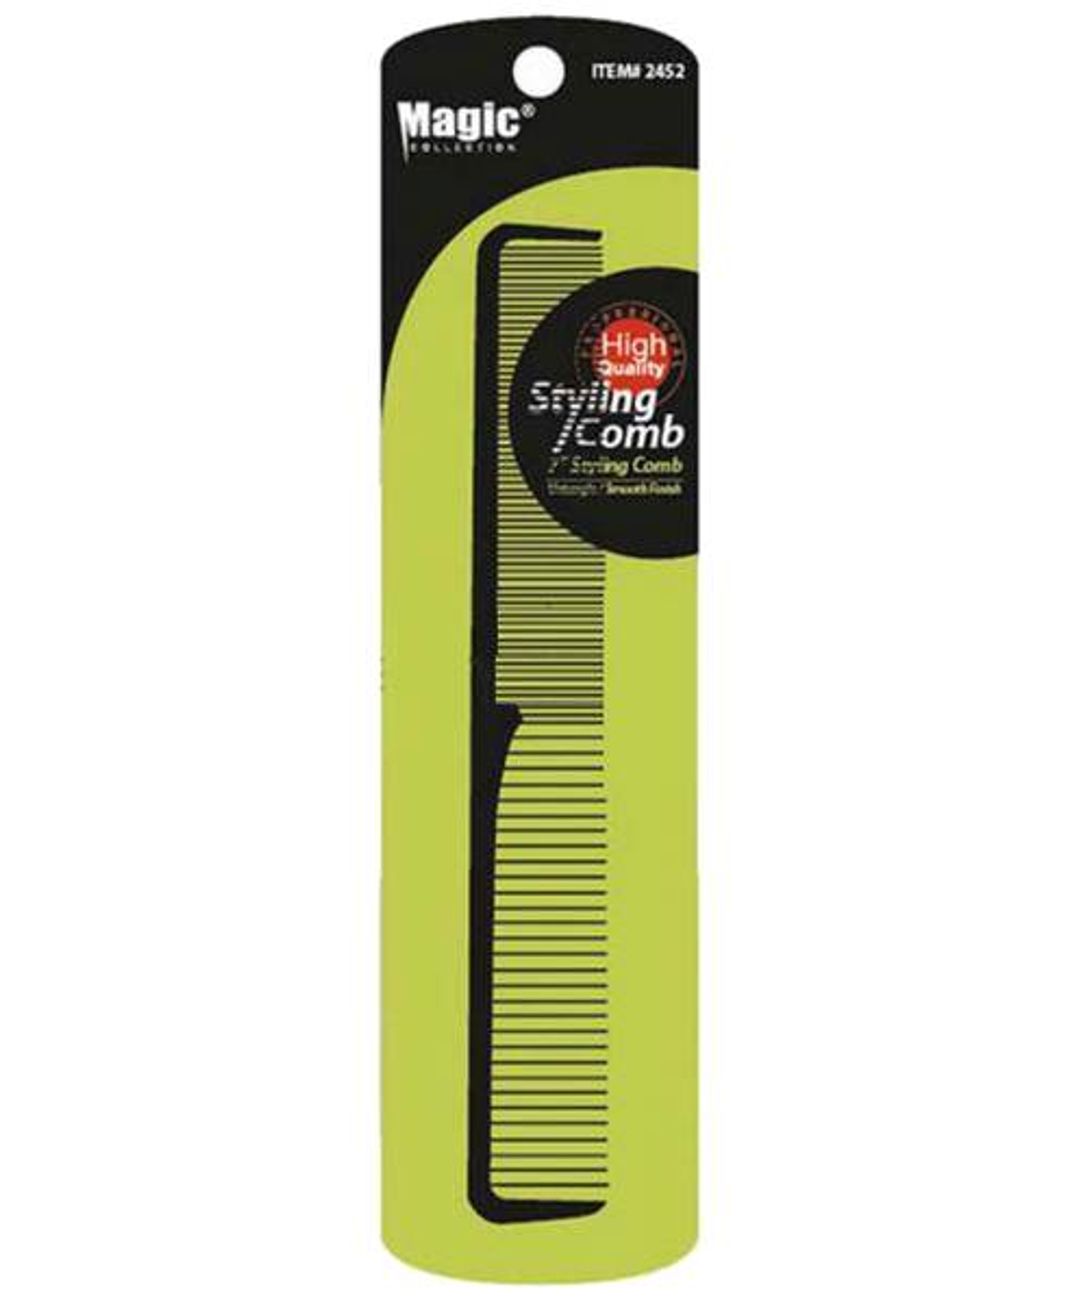 Magic Collection Styling Comb - 2452